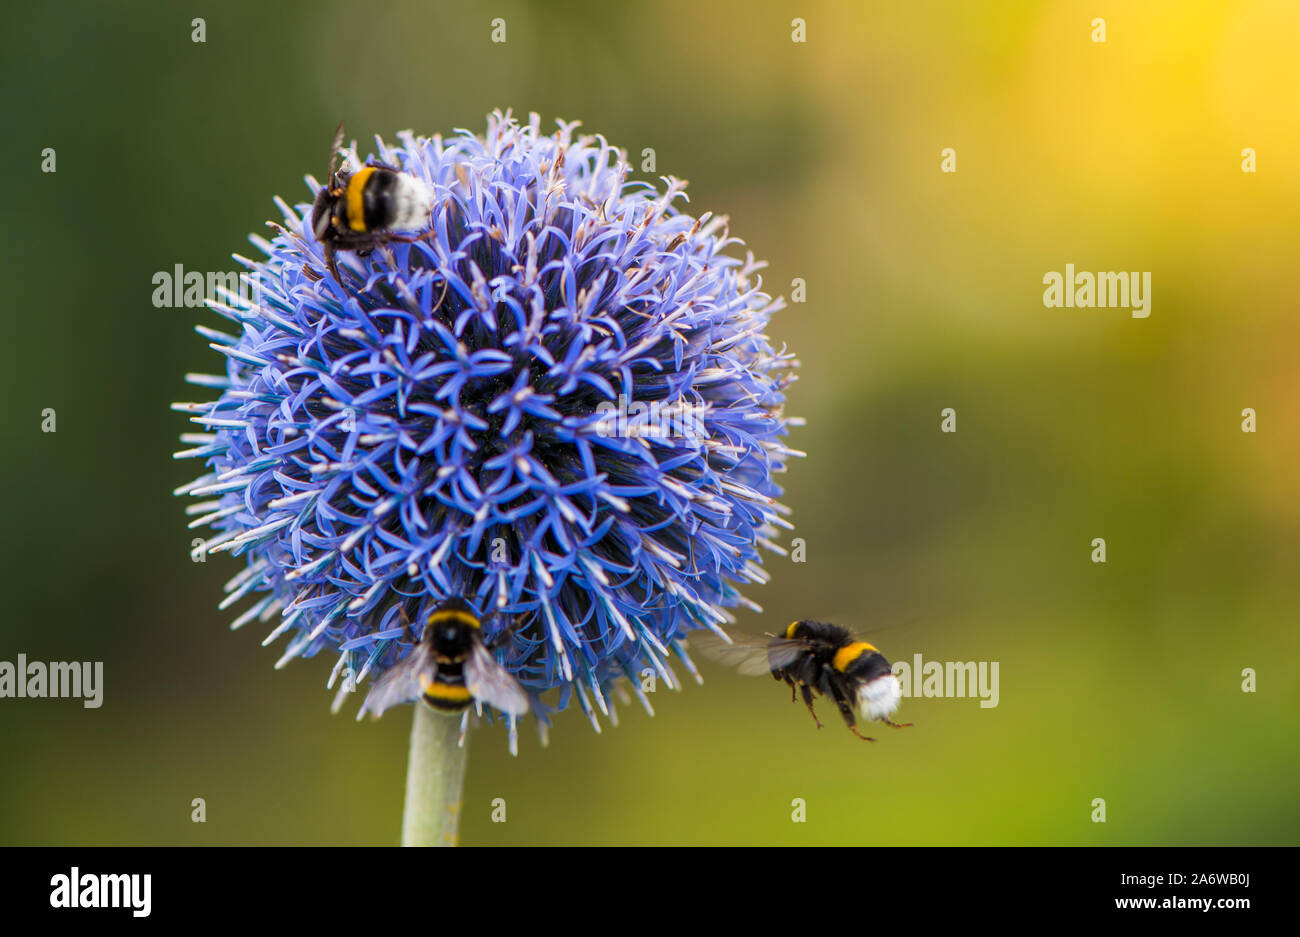 Three Bumble Bees on Echinops. Green Blurry Background. Copy Space. Stock Photo